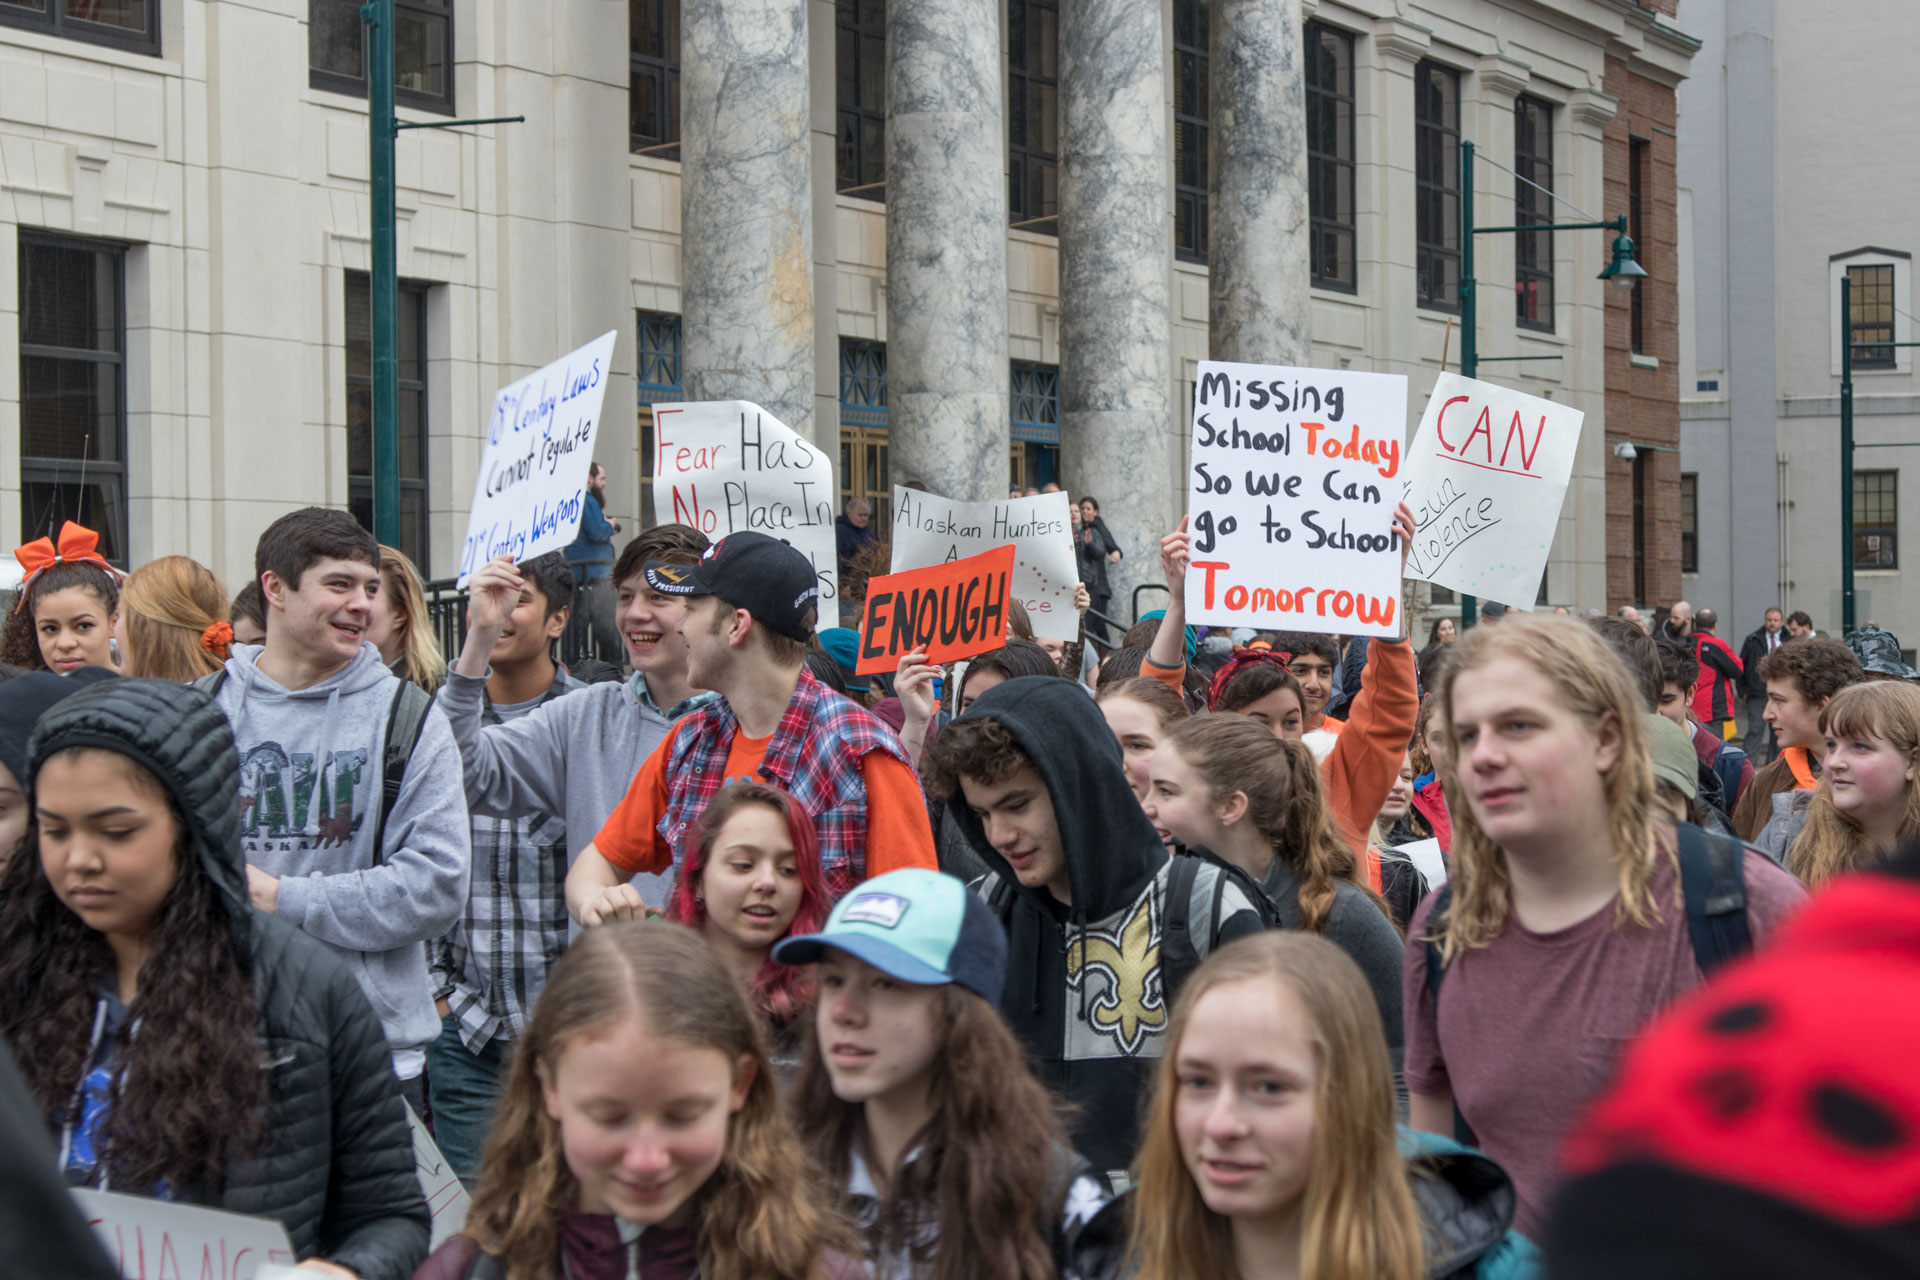 Juneau students take part in national student walkout protesting gun